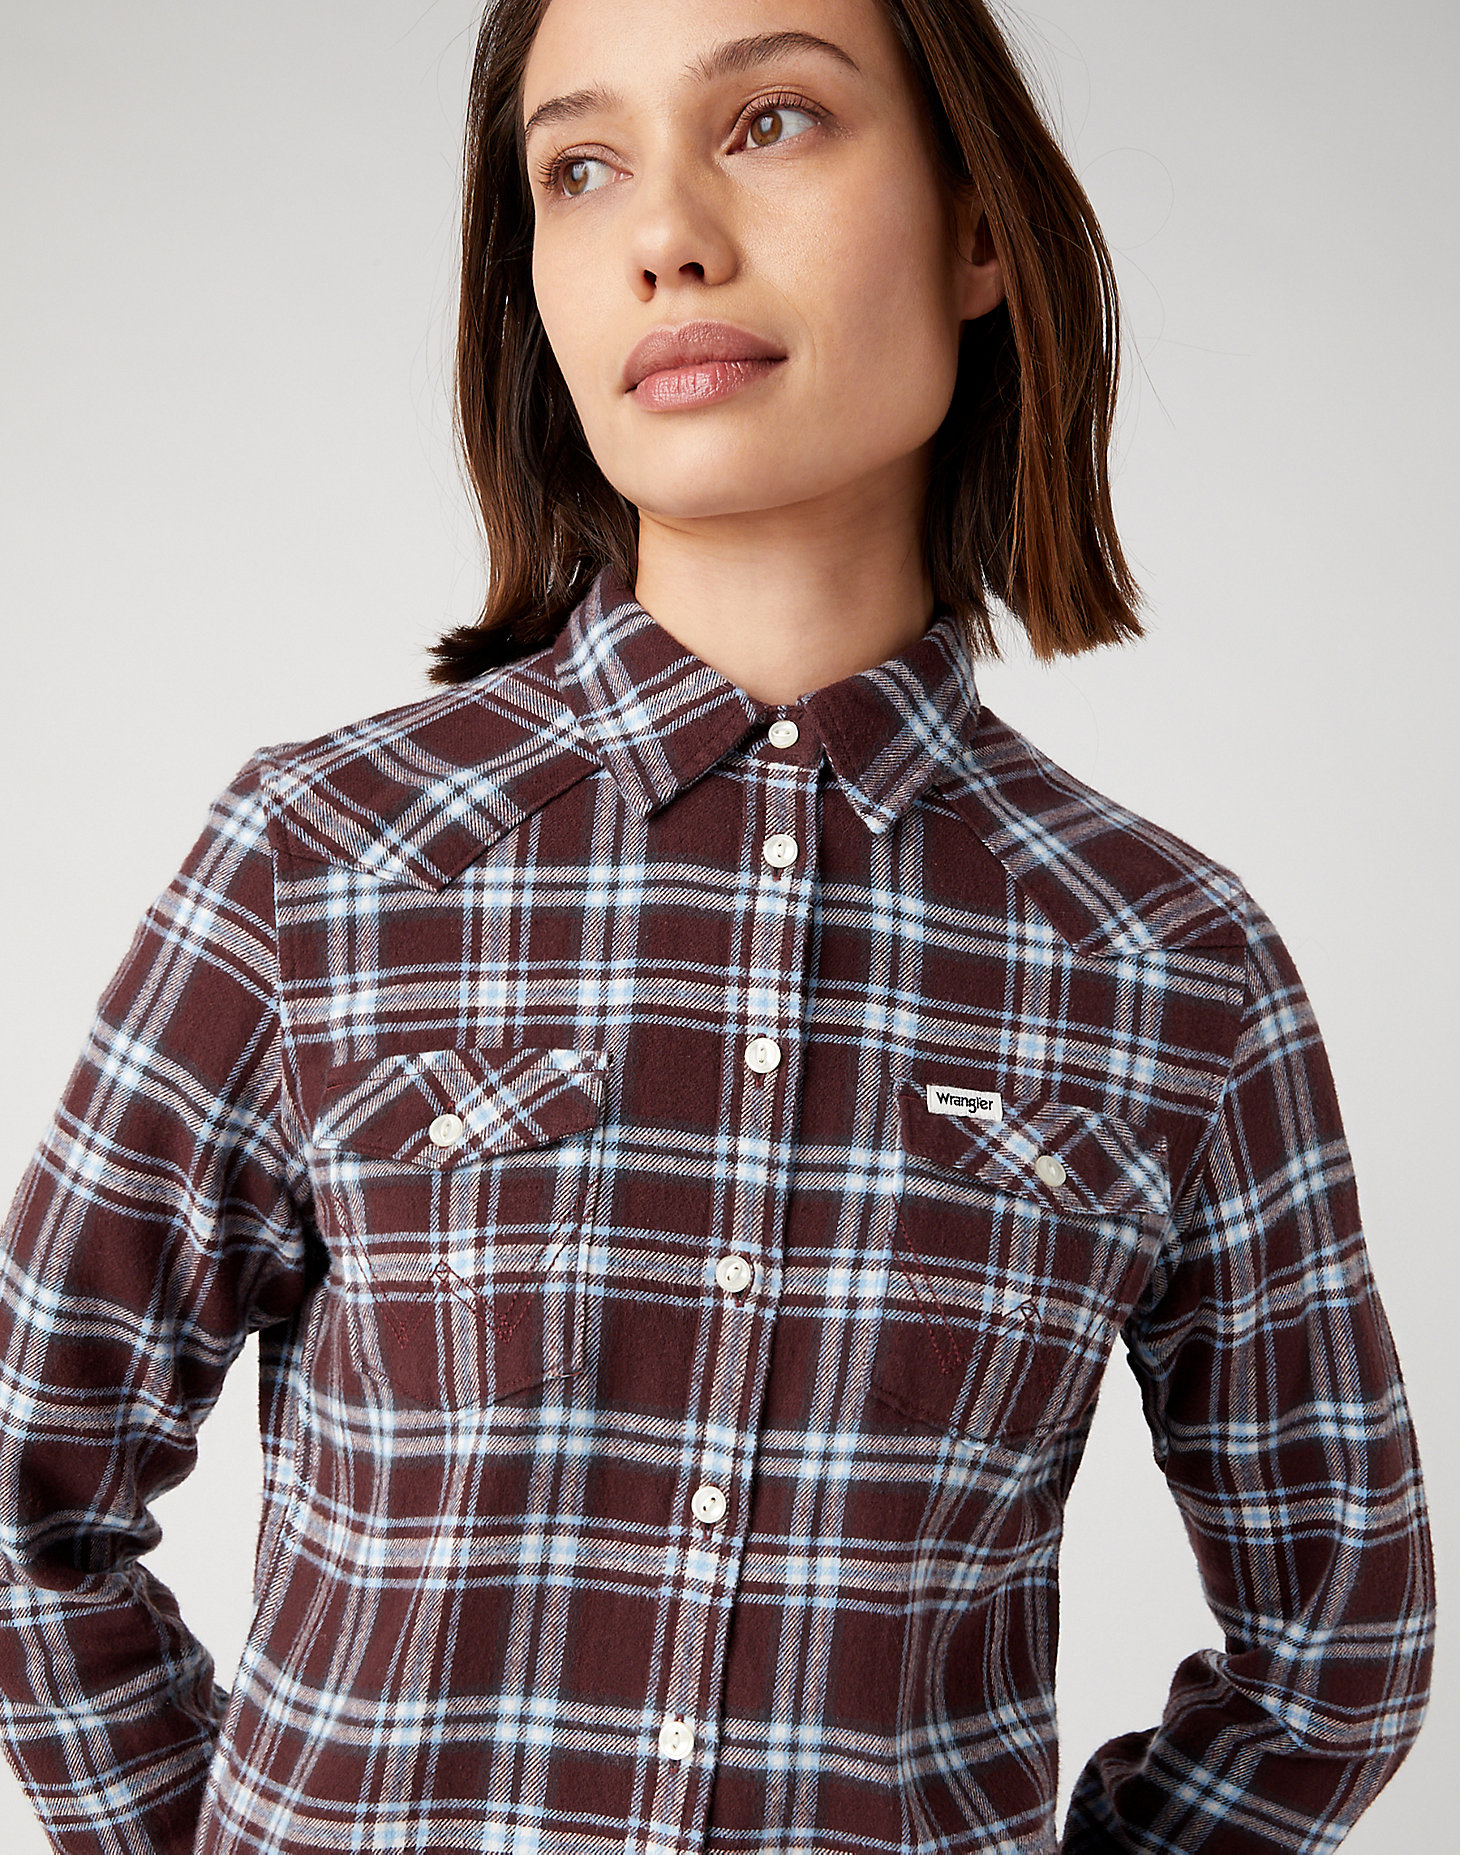 Western Check Shirt in Doll alternative view 3